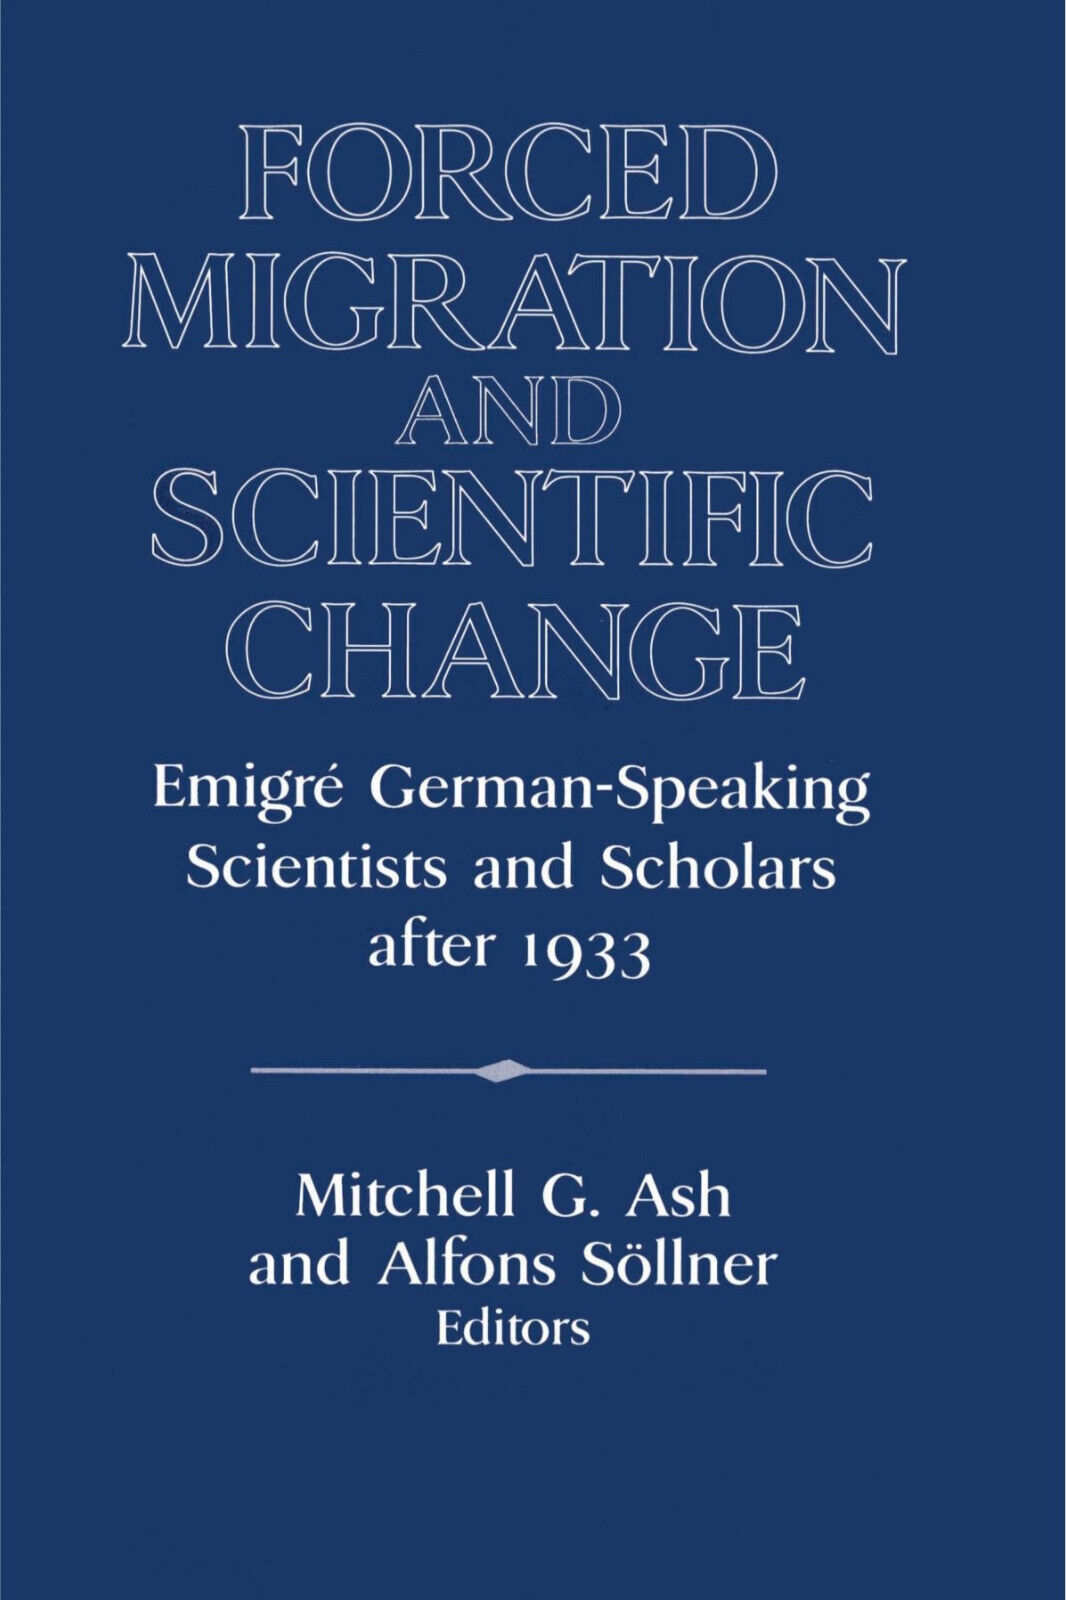 Forced Migration and Scientific Change - Mitchell G. Ash - Cambridge, 2002